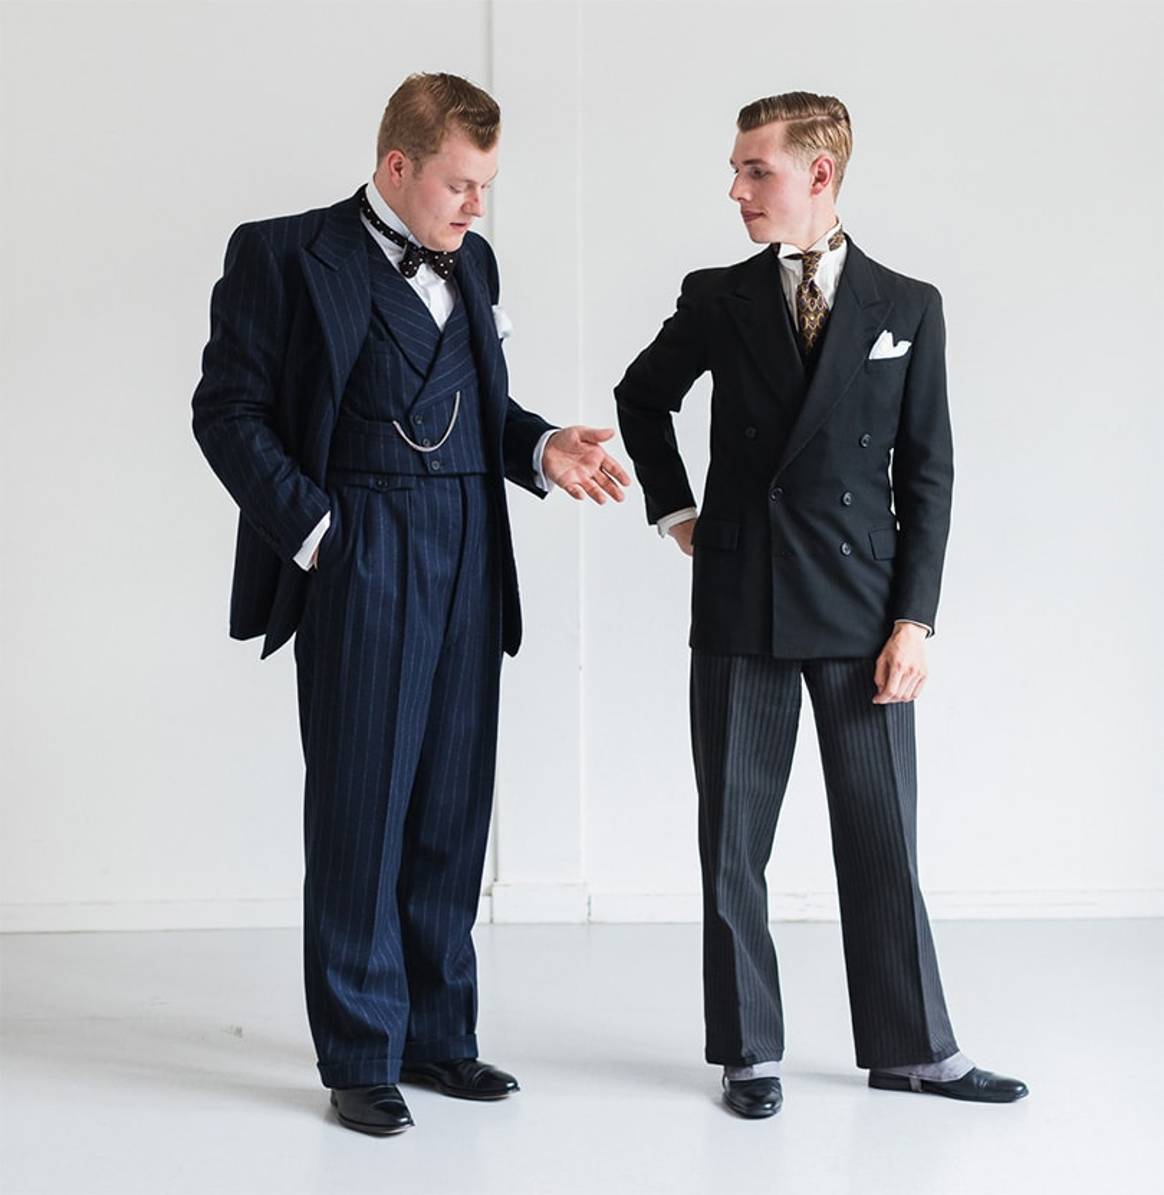 Six students become ‘Masters in Craft’ at Master Tailor Insitute, Amsterdam